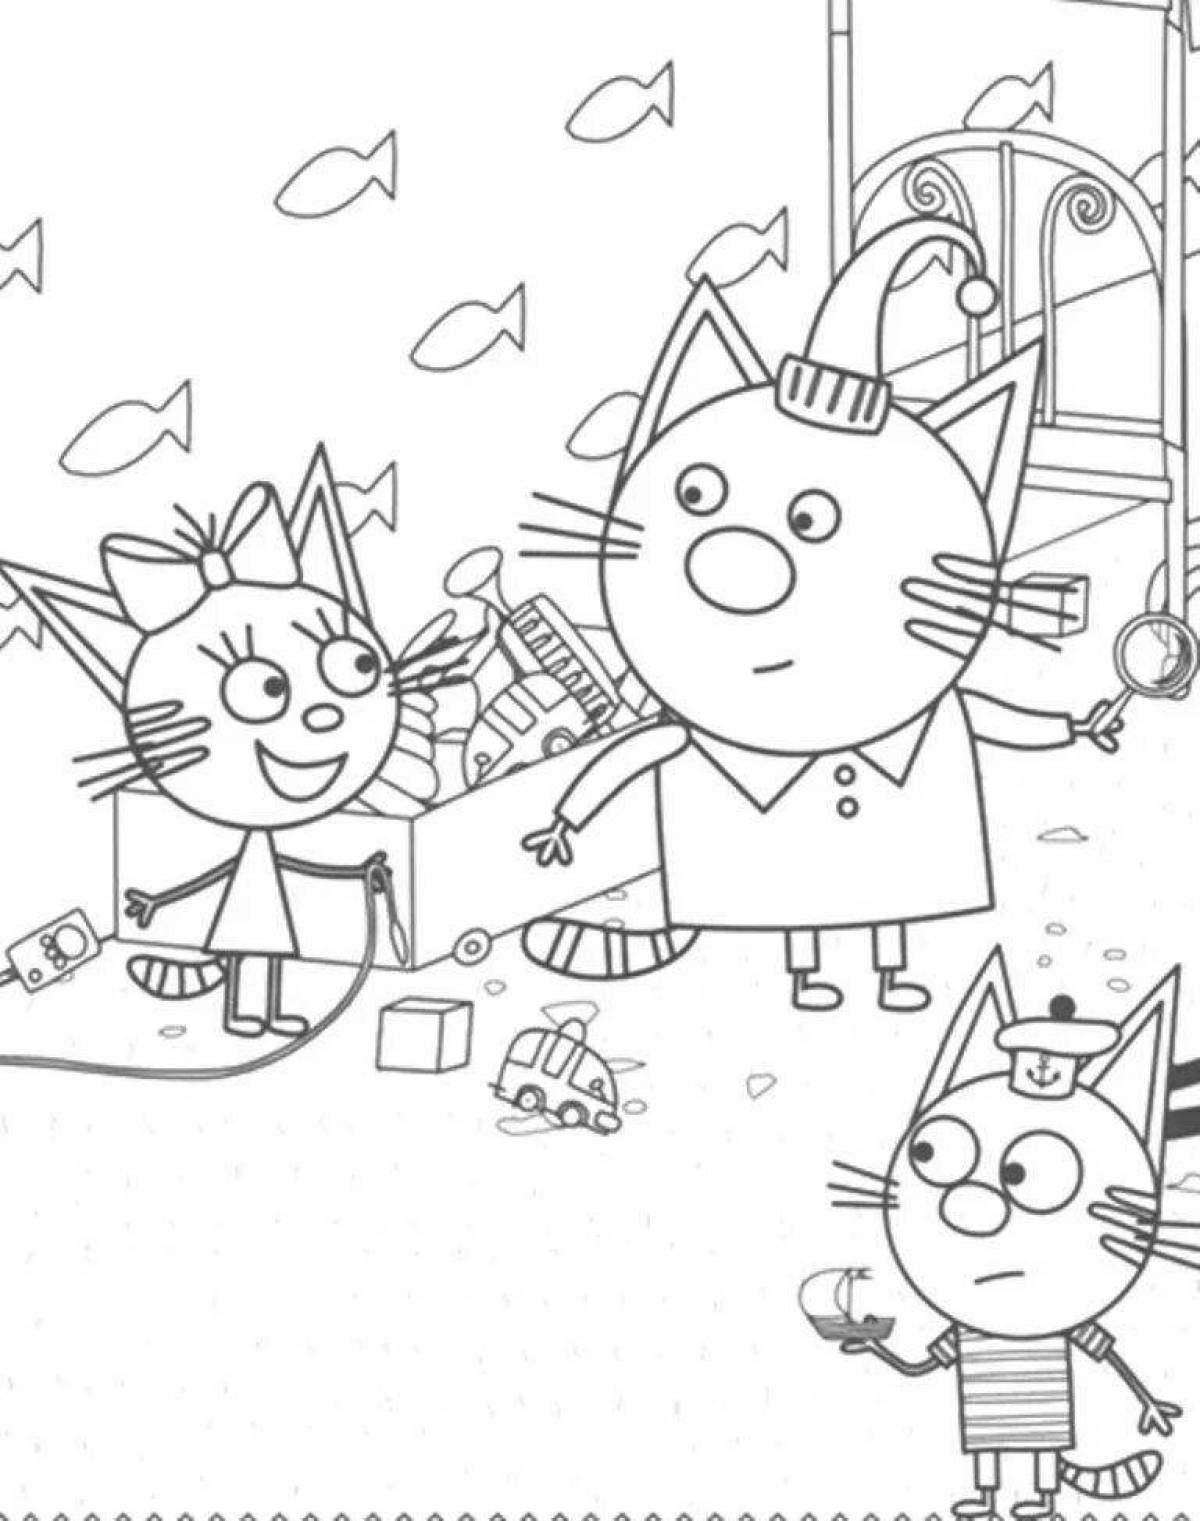 Coloring book magical new year three cats